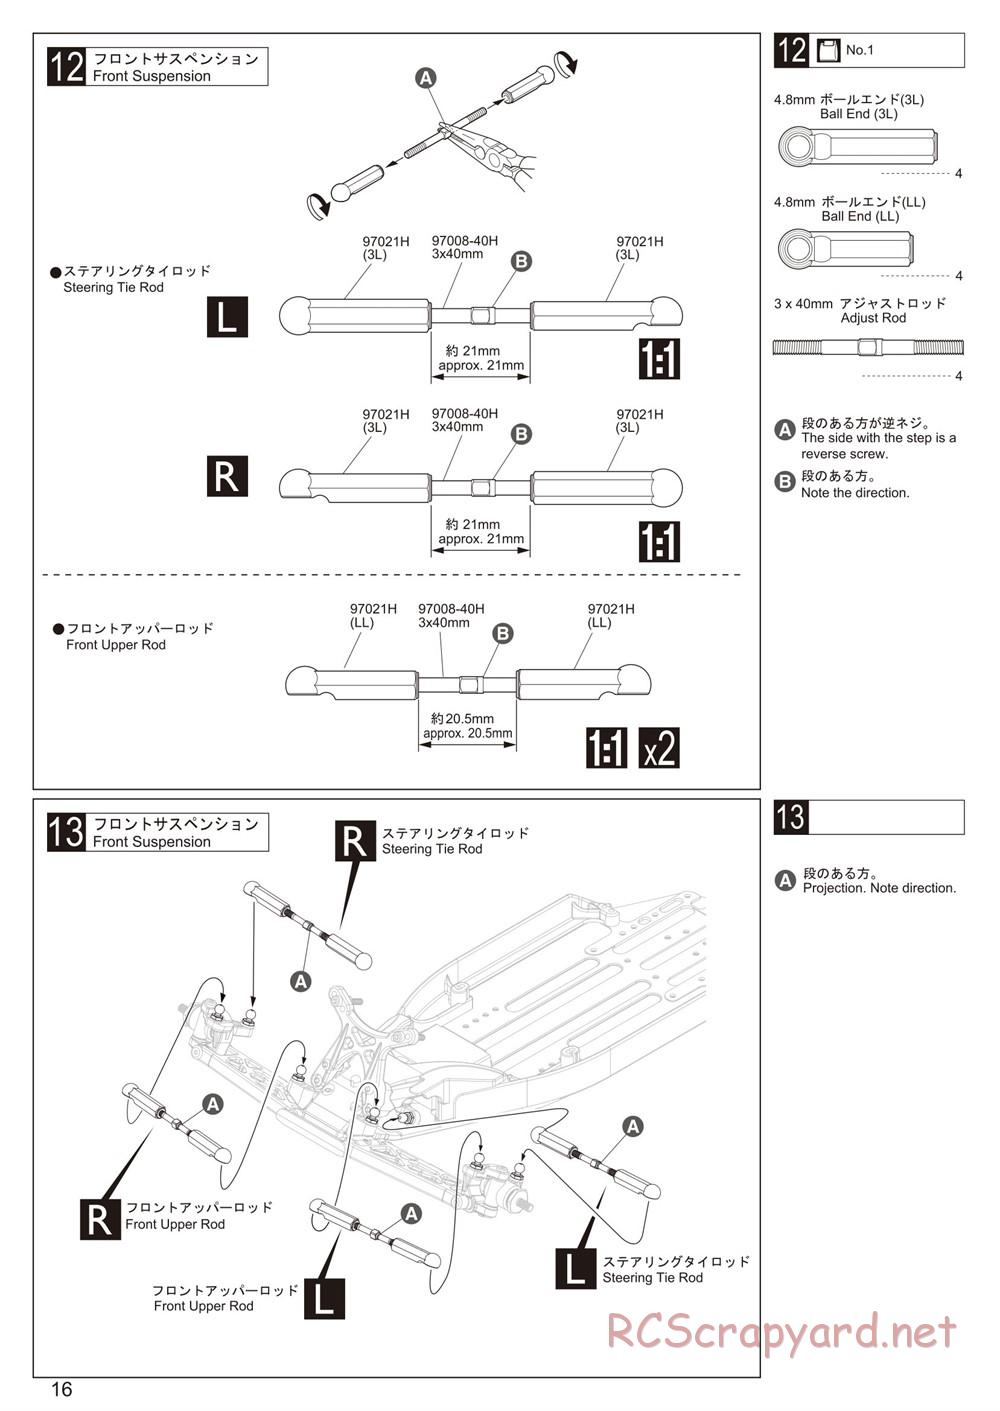 Kyosho - Ultima RB6.6 - Manual - Page 16